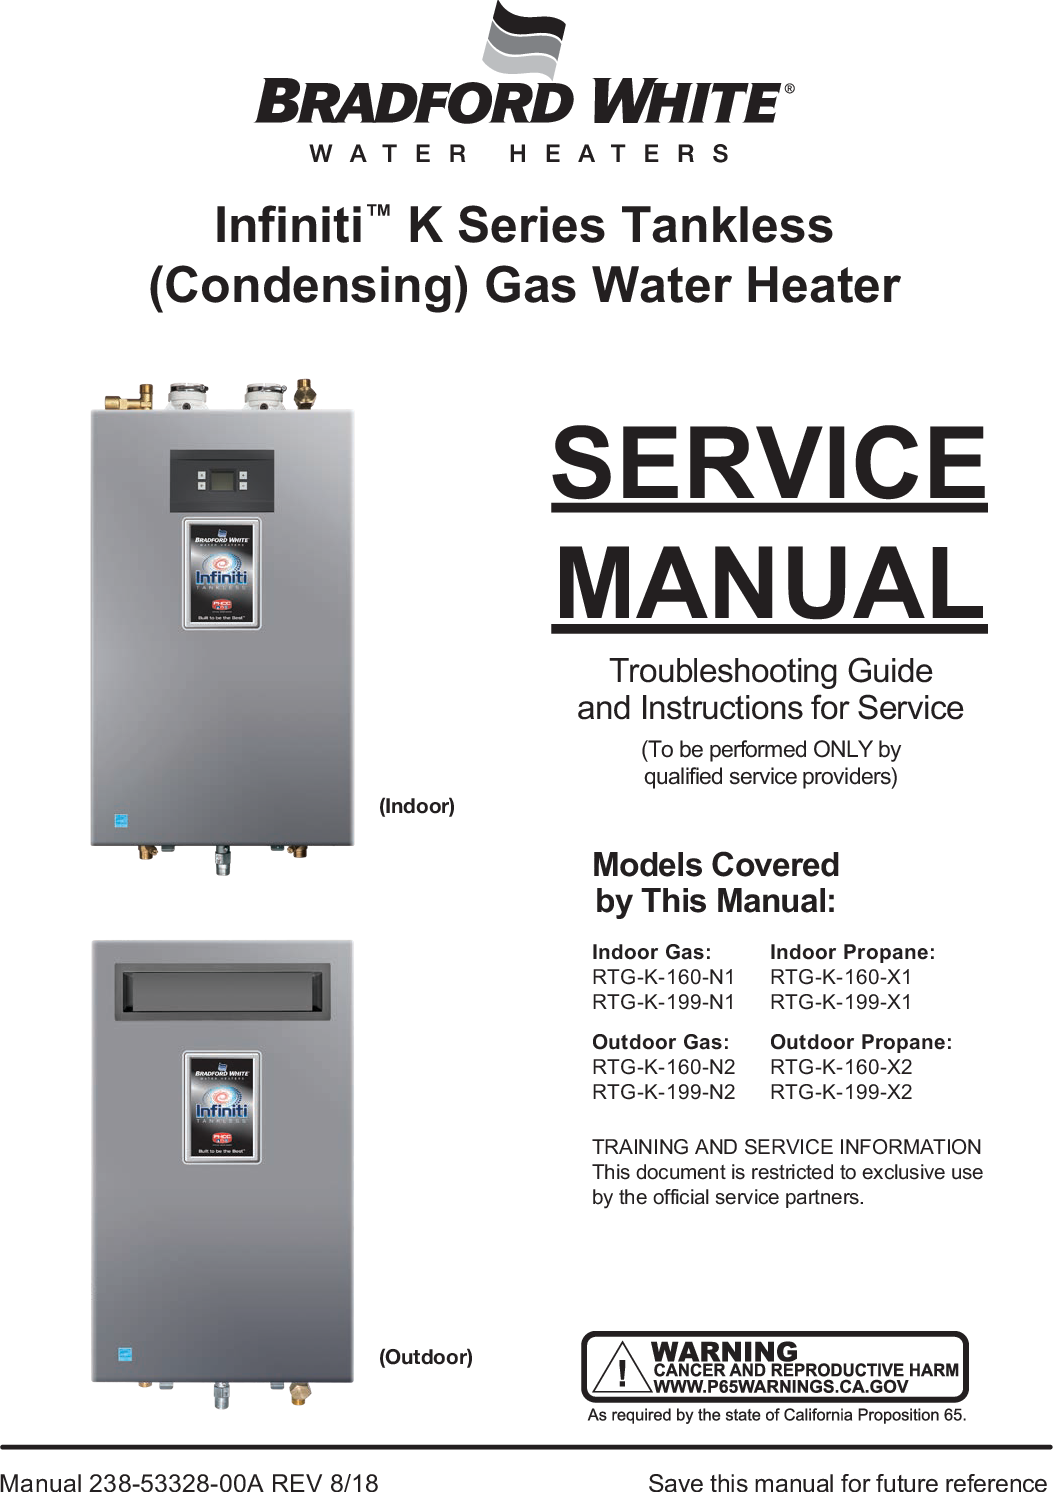 Residential Ultra Low Nox Power Direct Vent Gas Water Heater Manualzz